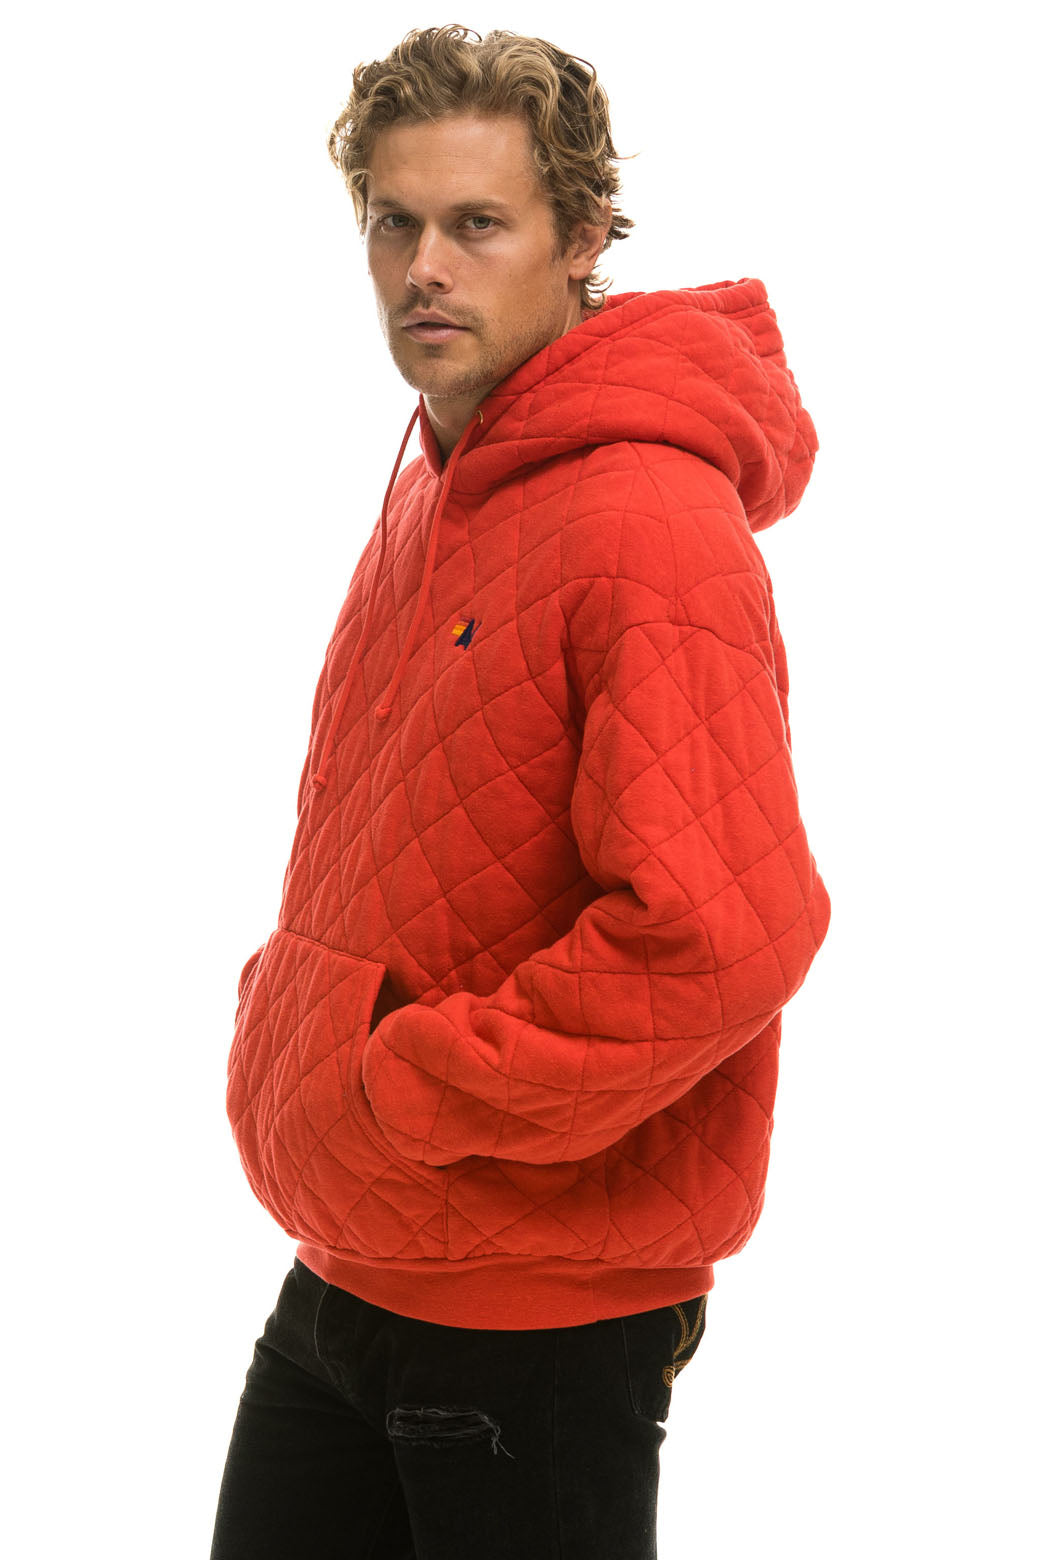 QUILTED RELAXED PULLOVER HOODIE - RED Hoodie Aviator Nation 